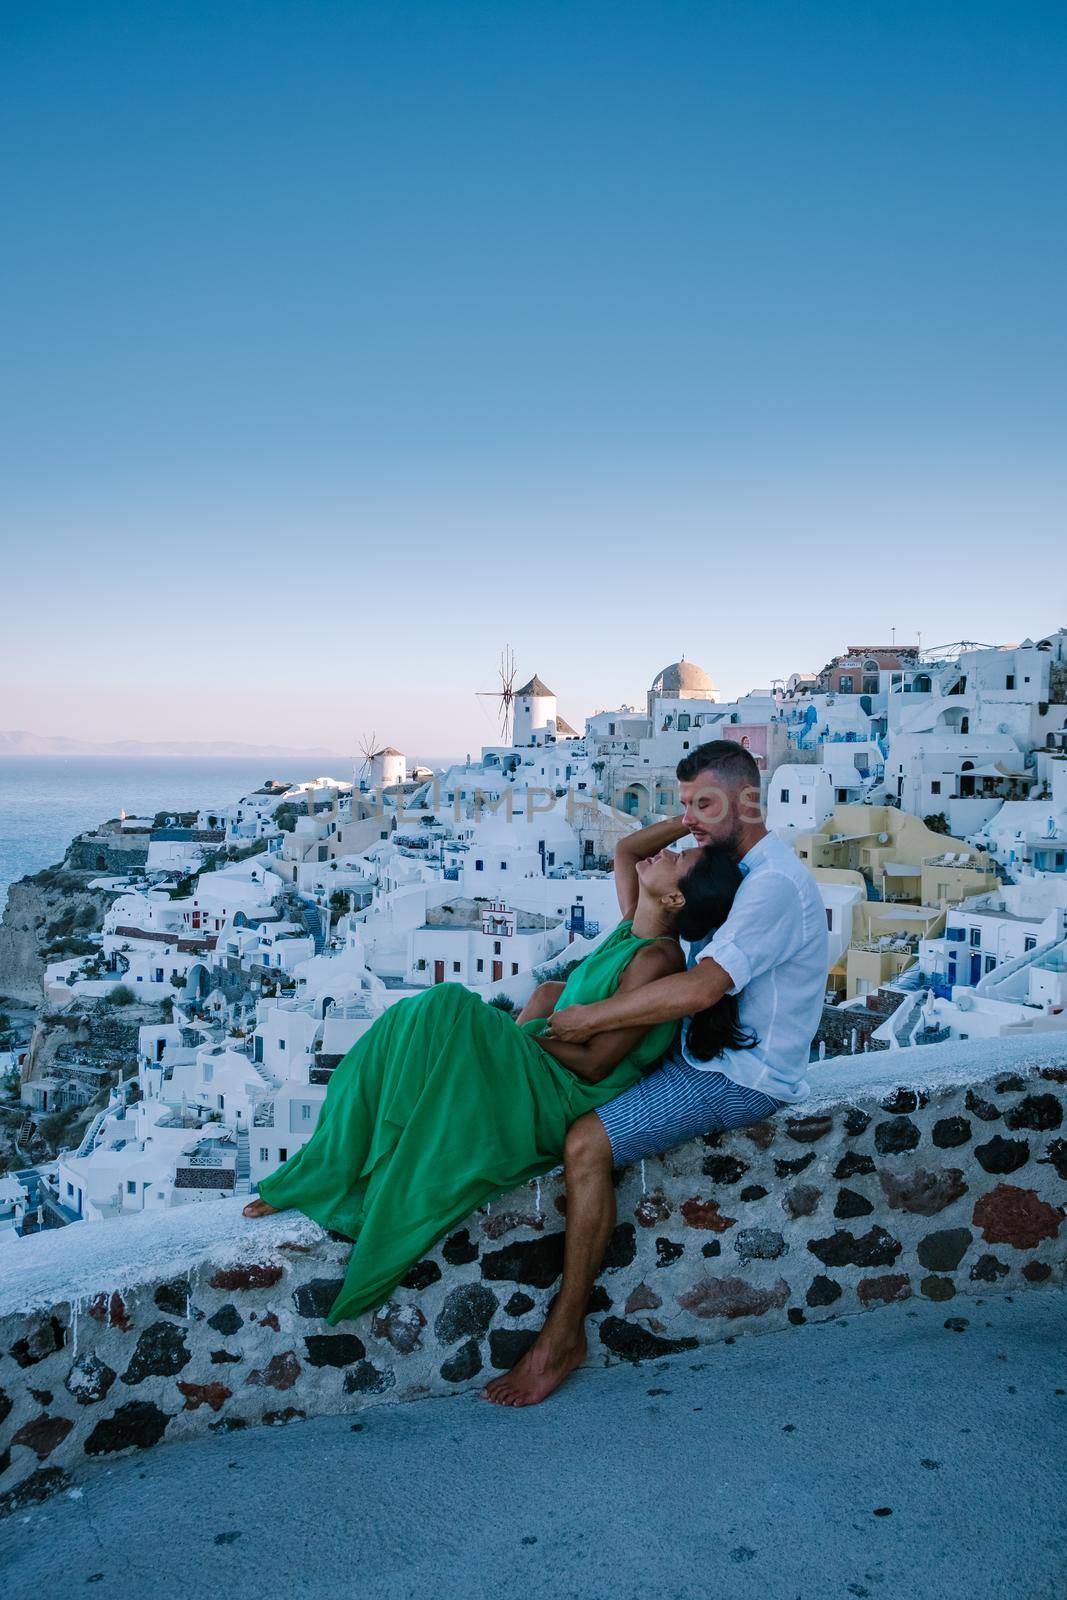 Santorini Greece, young couple on luxury vacation at the Island of Santorini watching sunrise by the blue dome church and whitewashed village of Oia Santorini Greece during sunrise, men and woman on holiday in Greece by fokkebok